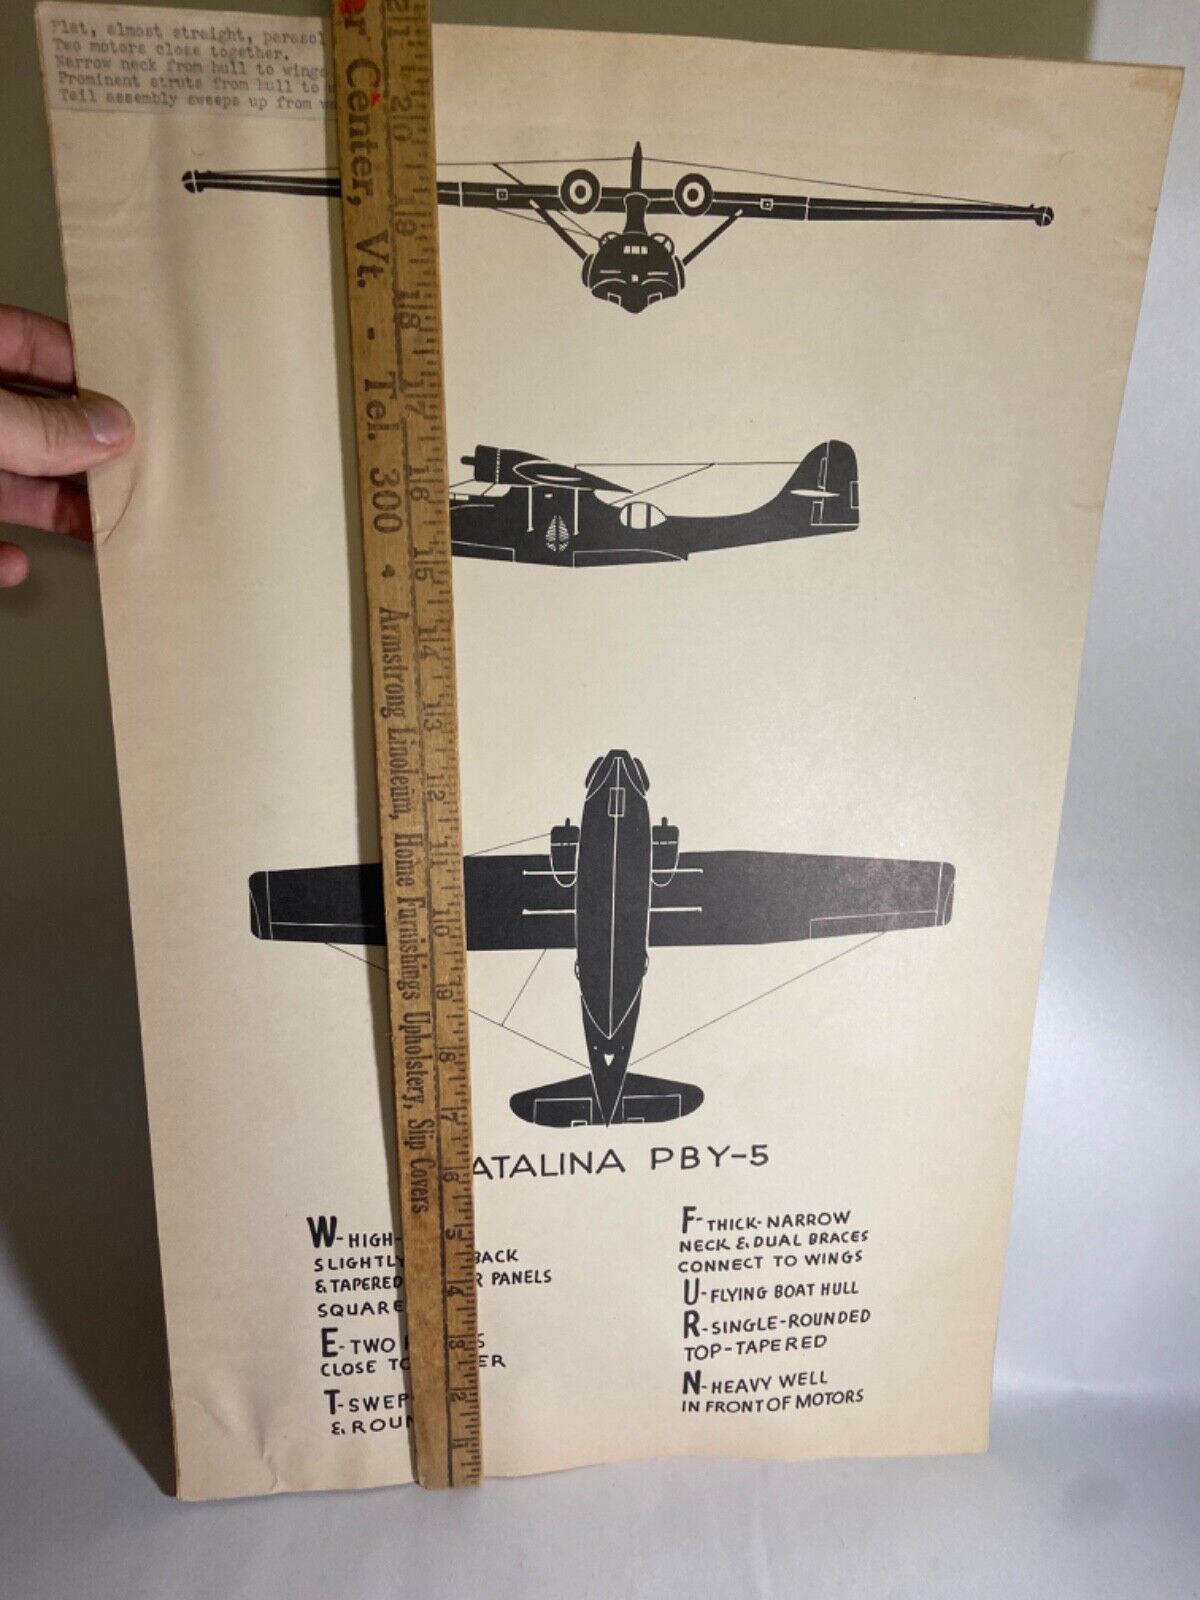 Vintage WWII Consolidated PBY Catalina Recognition Poster - Rare with notes! Без бренда - фотография #2